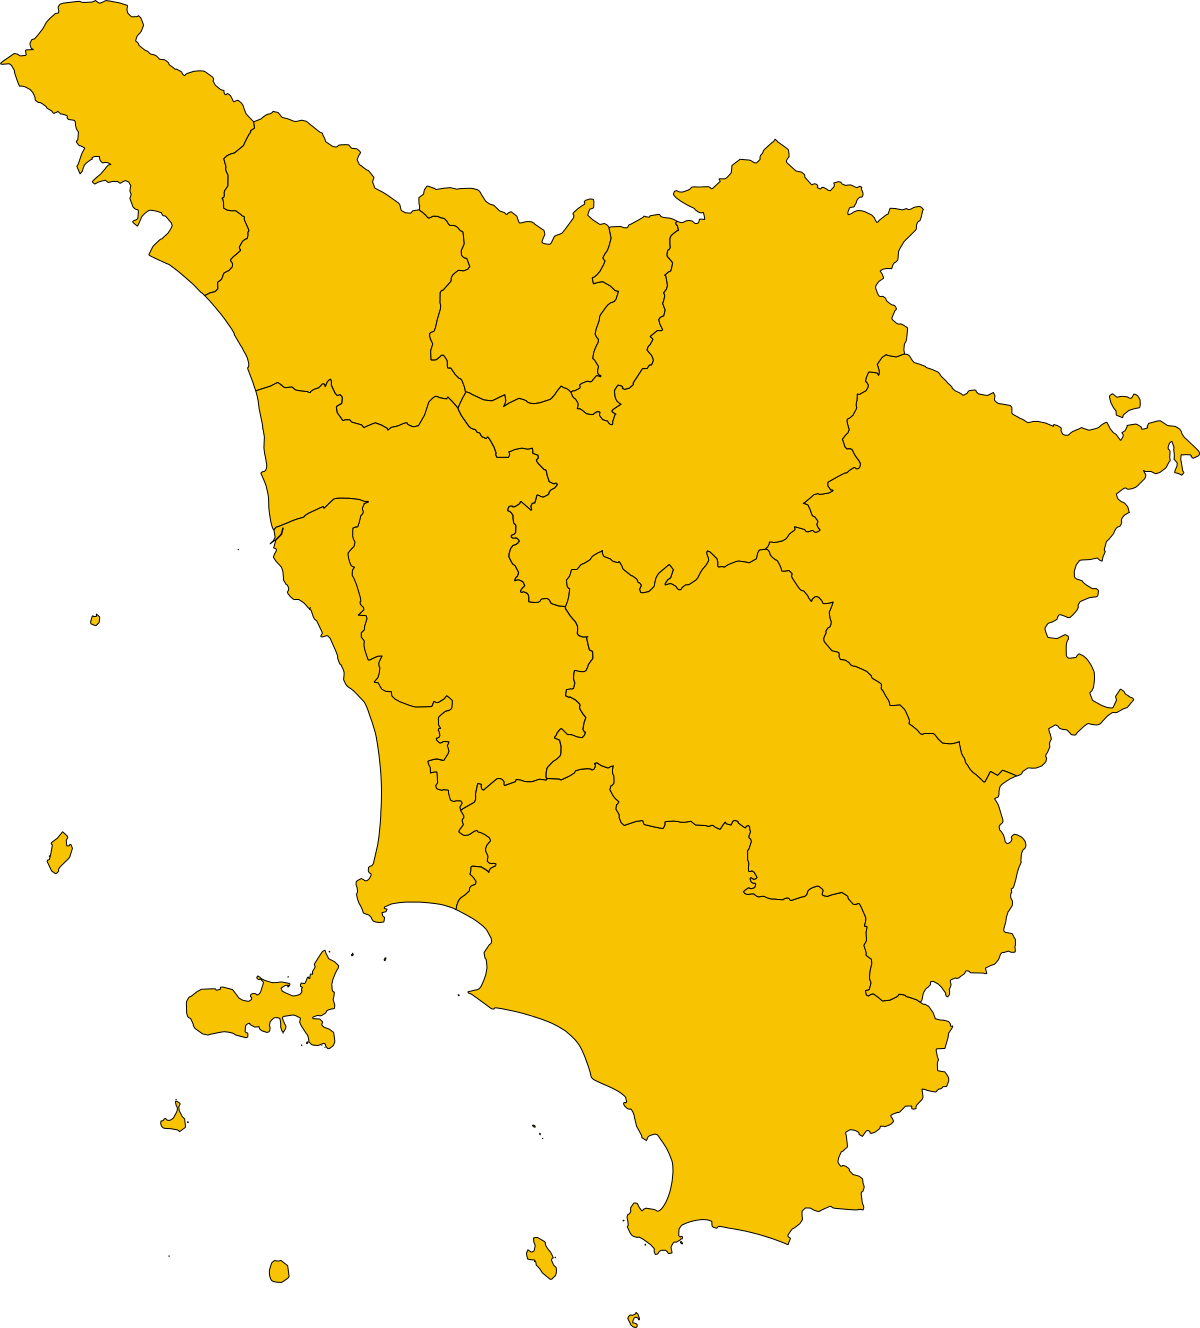 Bestand:Map Of Region Of Tuscany, Italy.Svg - Wikipedia